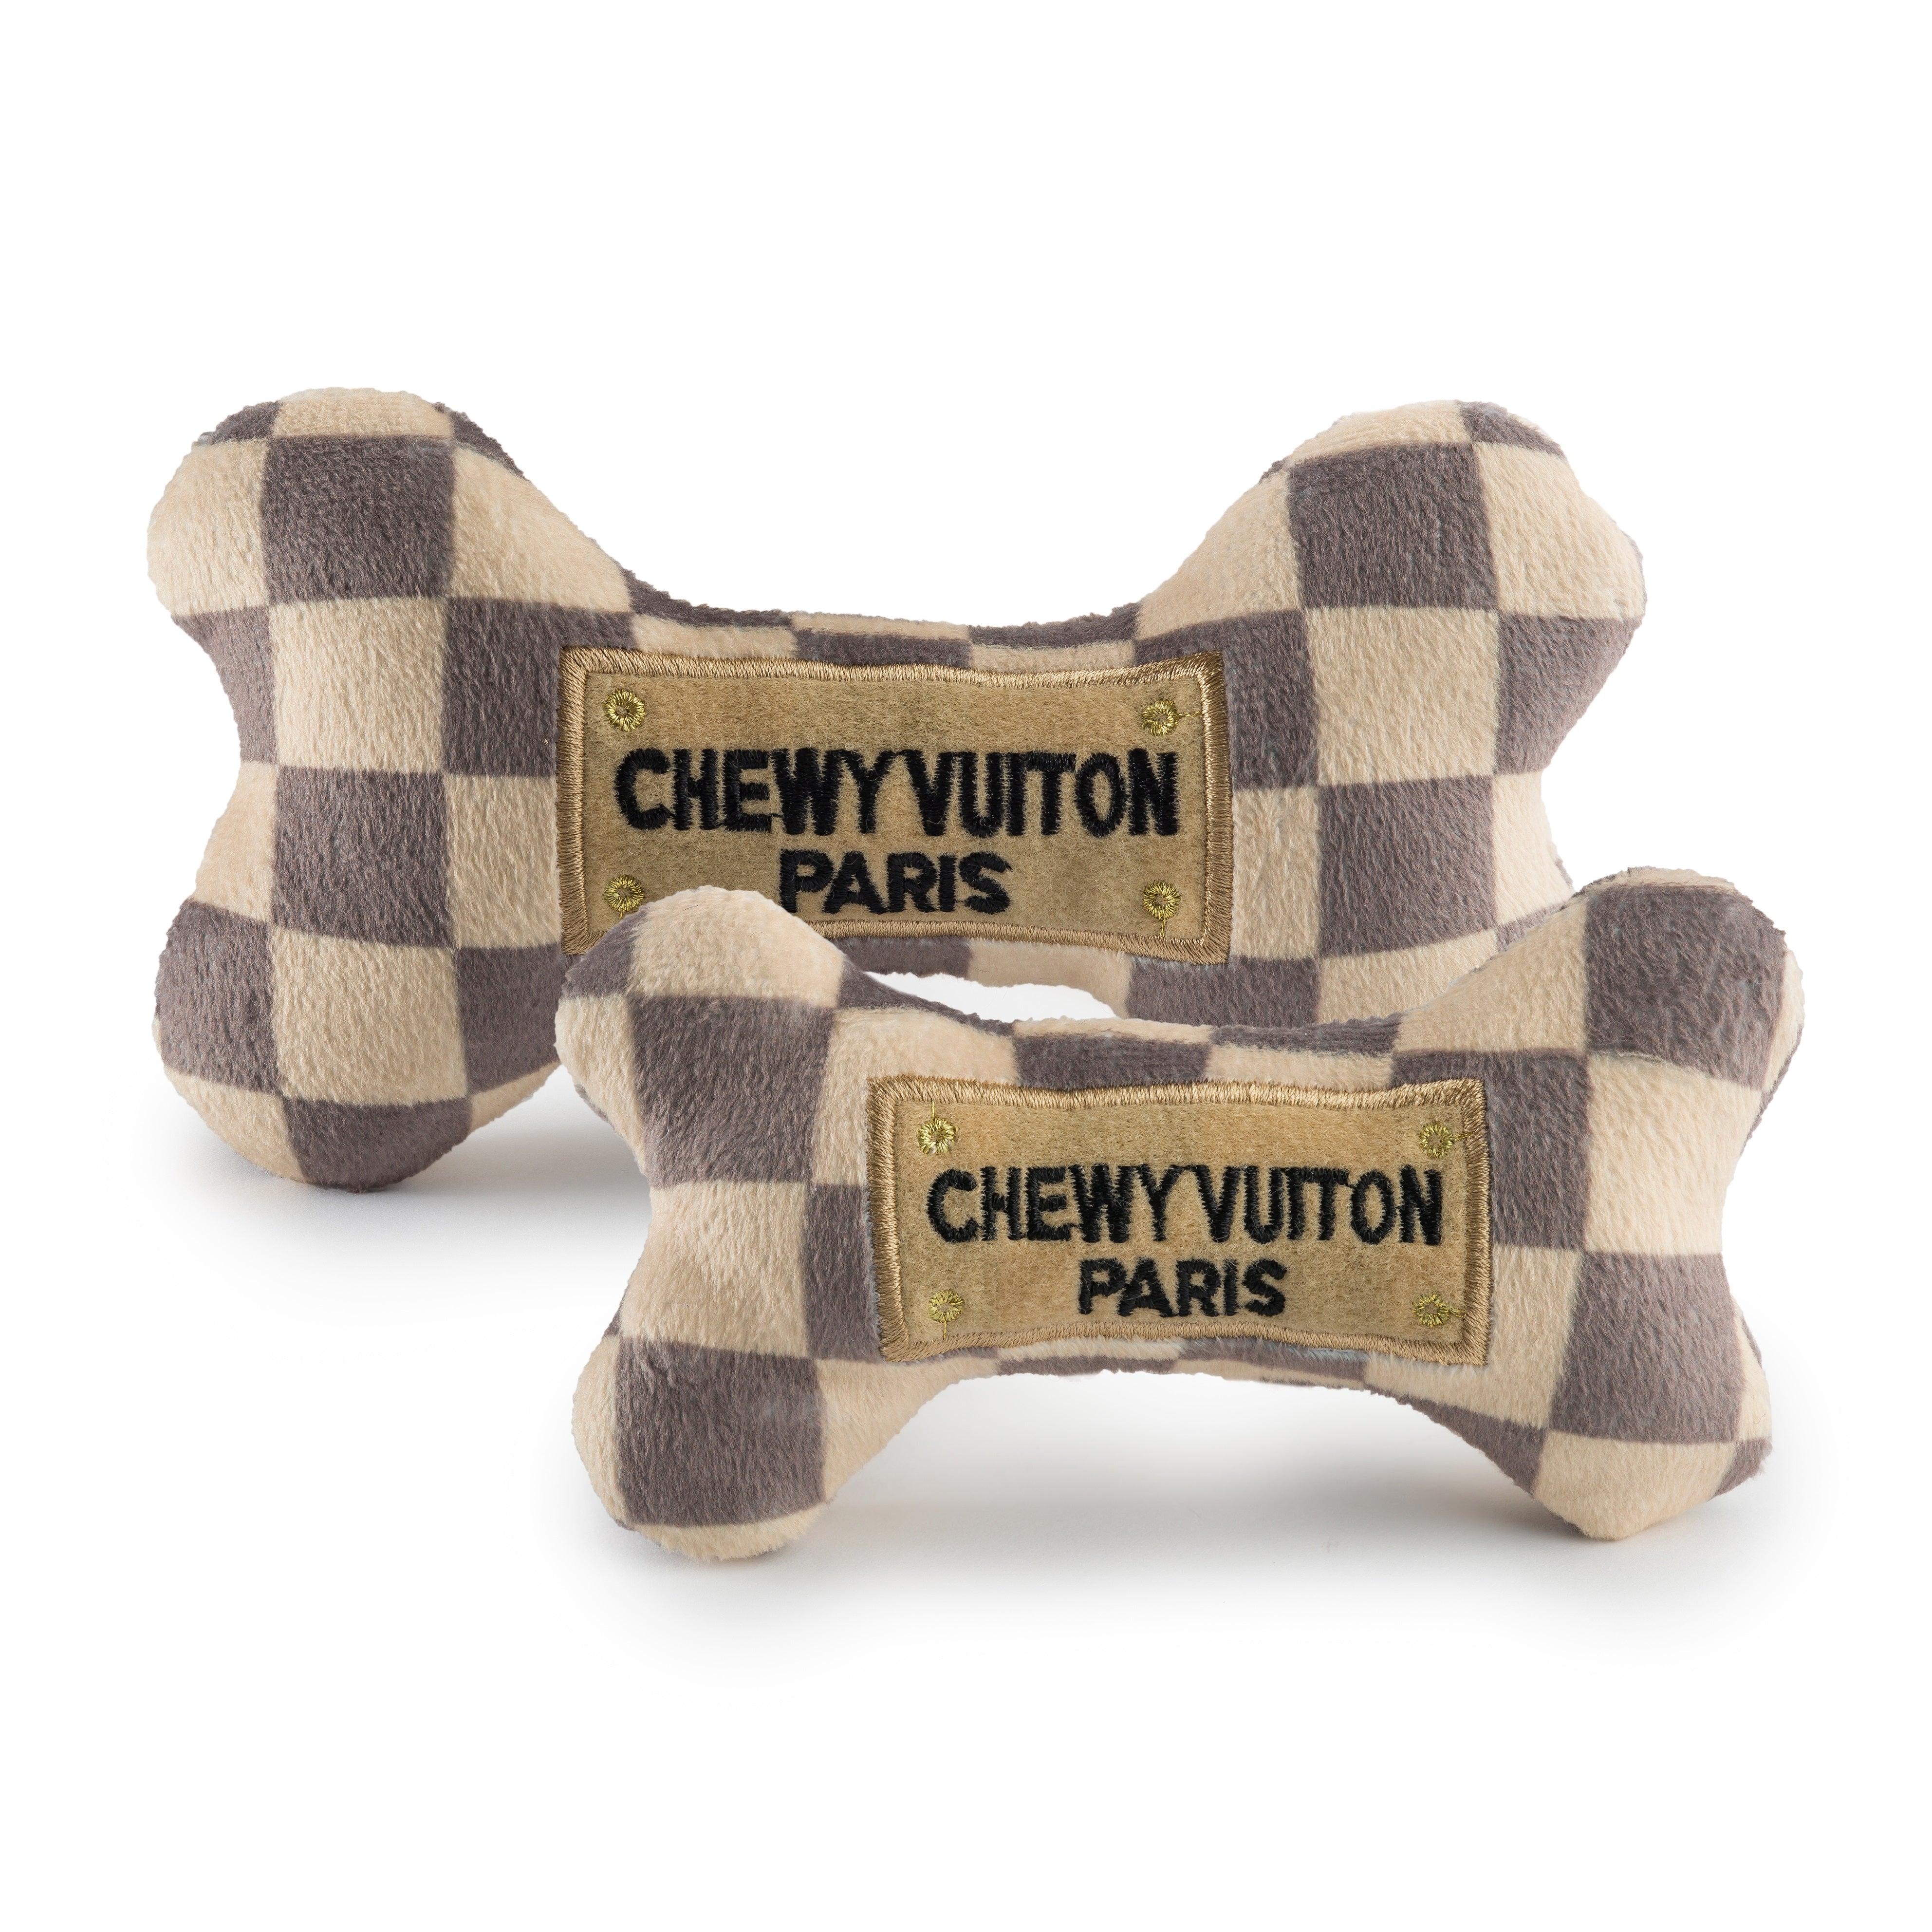 Haute Diggity Dog Chewy Vuiton White Collection  